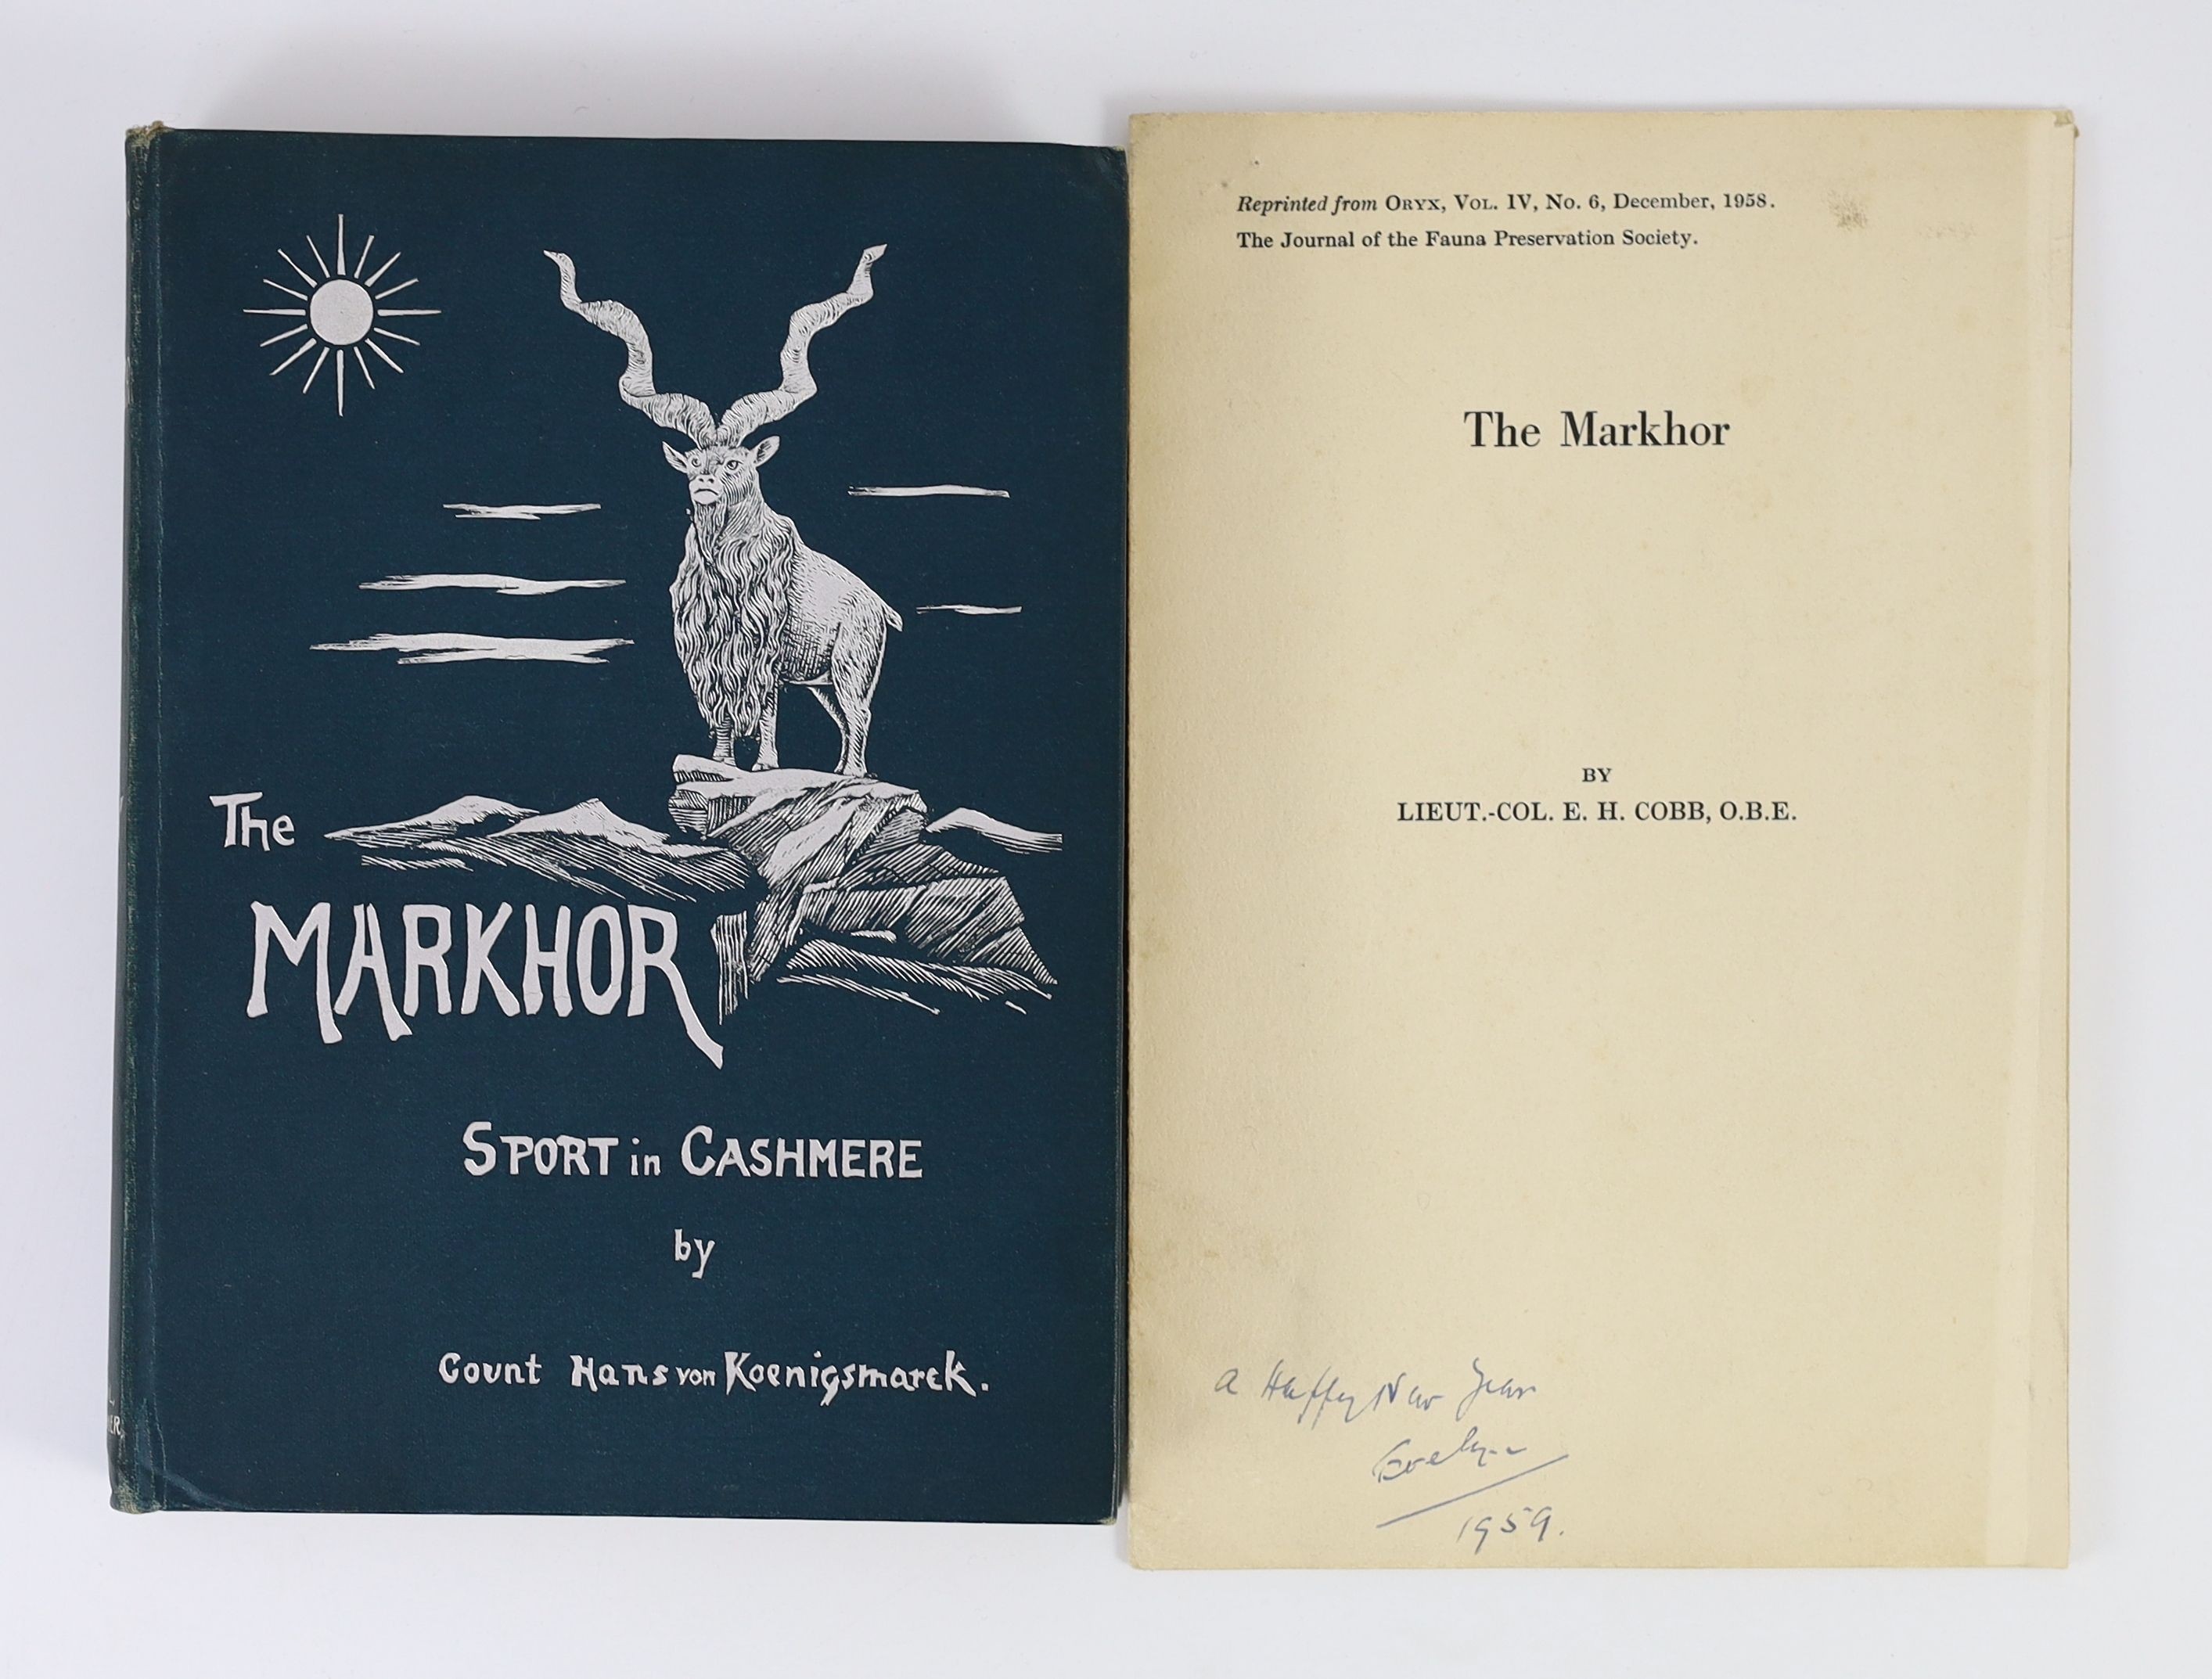 Koenigsmarck, Count Hans von. The Markhor Sport in Cashmere. London, 1910. Original blue pictorial cloth binding, a very good copy. Together with Cobb, E. H. Lieut-Col. The Markhor. 1958. A reprint from Oryx, the Journal